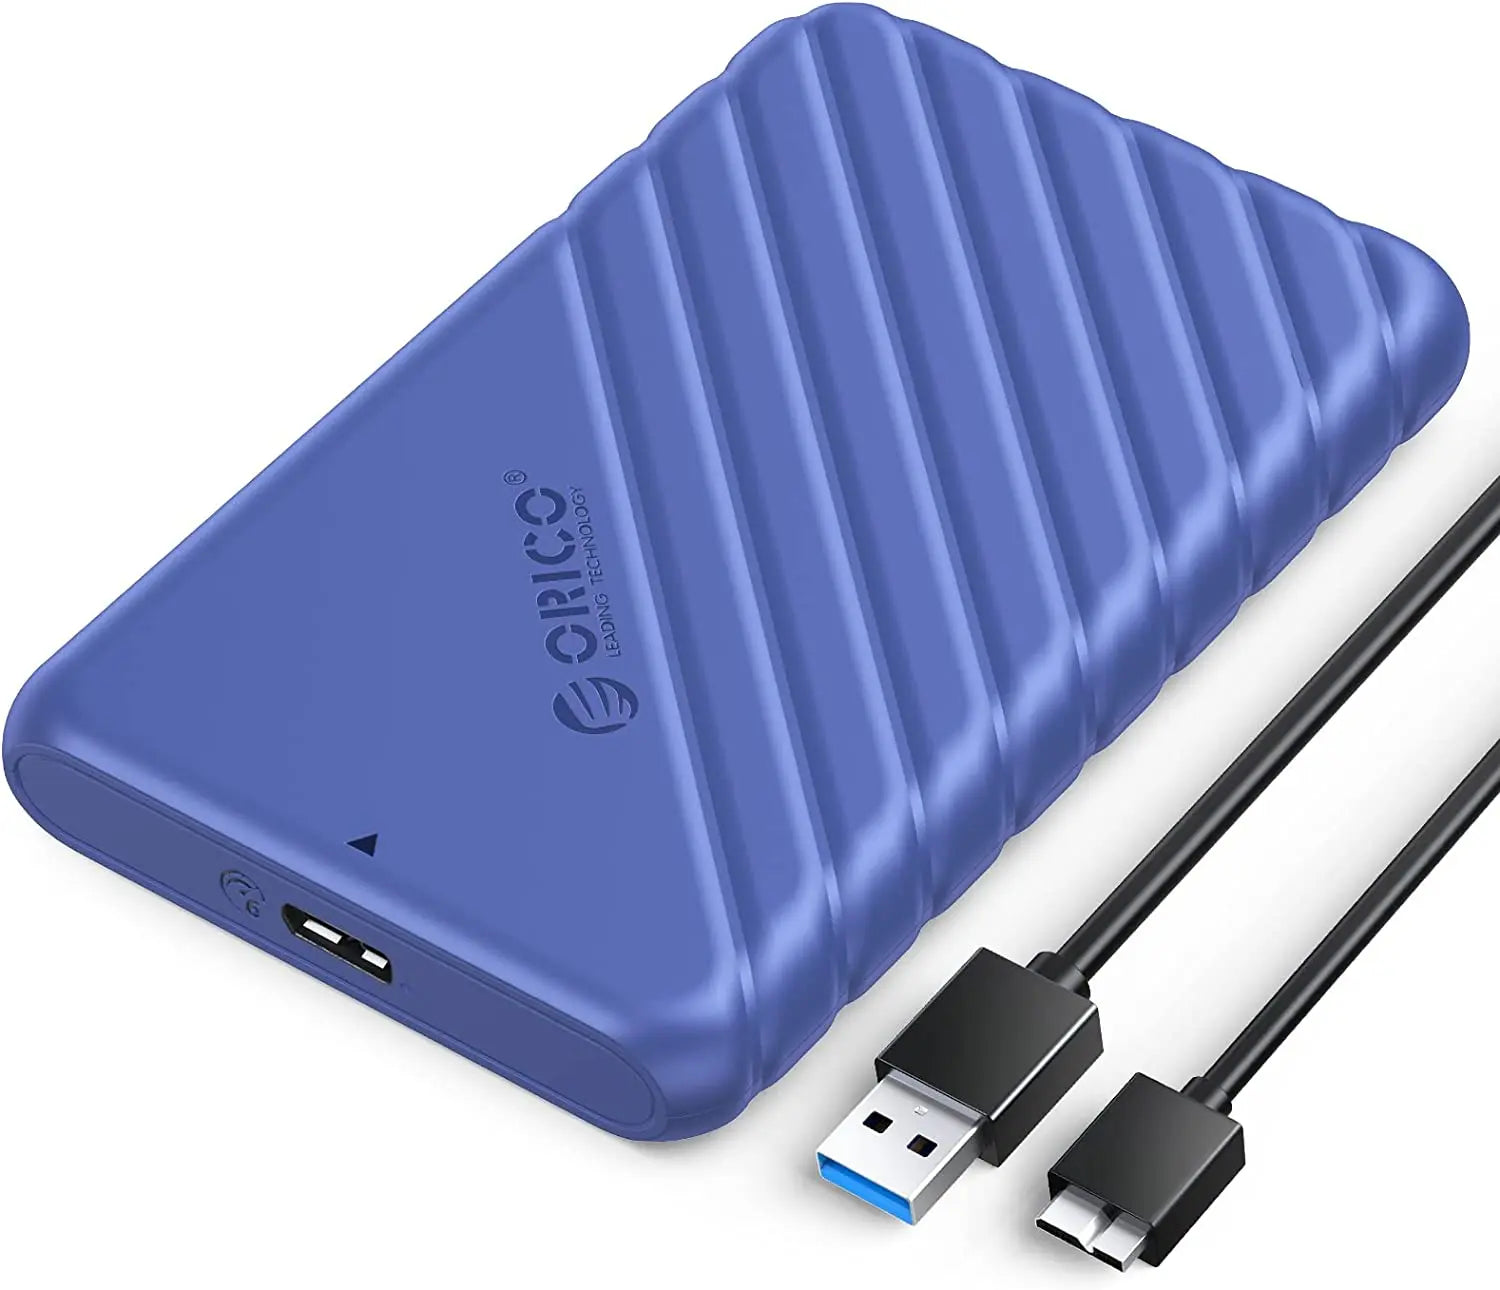 Multi-Colored High Speed 2.5-inch SATA to USB 3.0 HDD Enclosure Orico